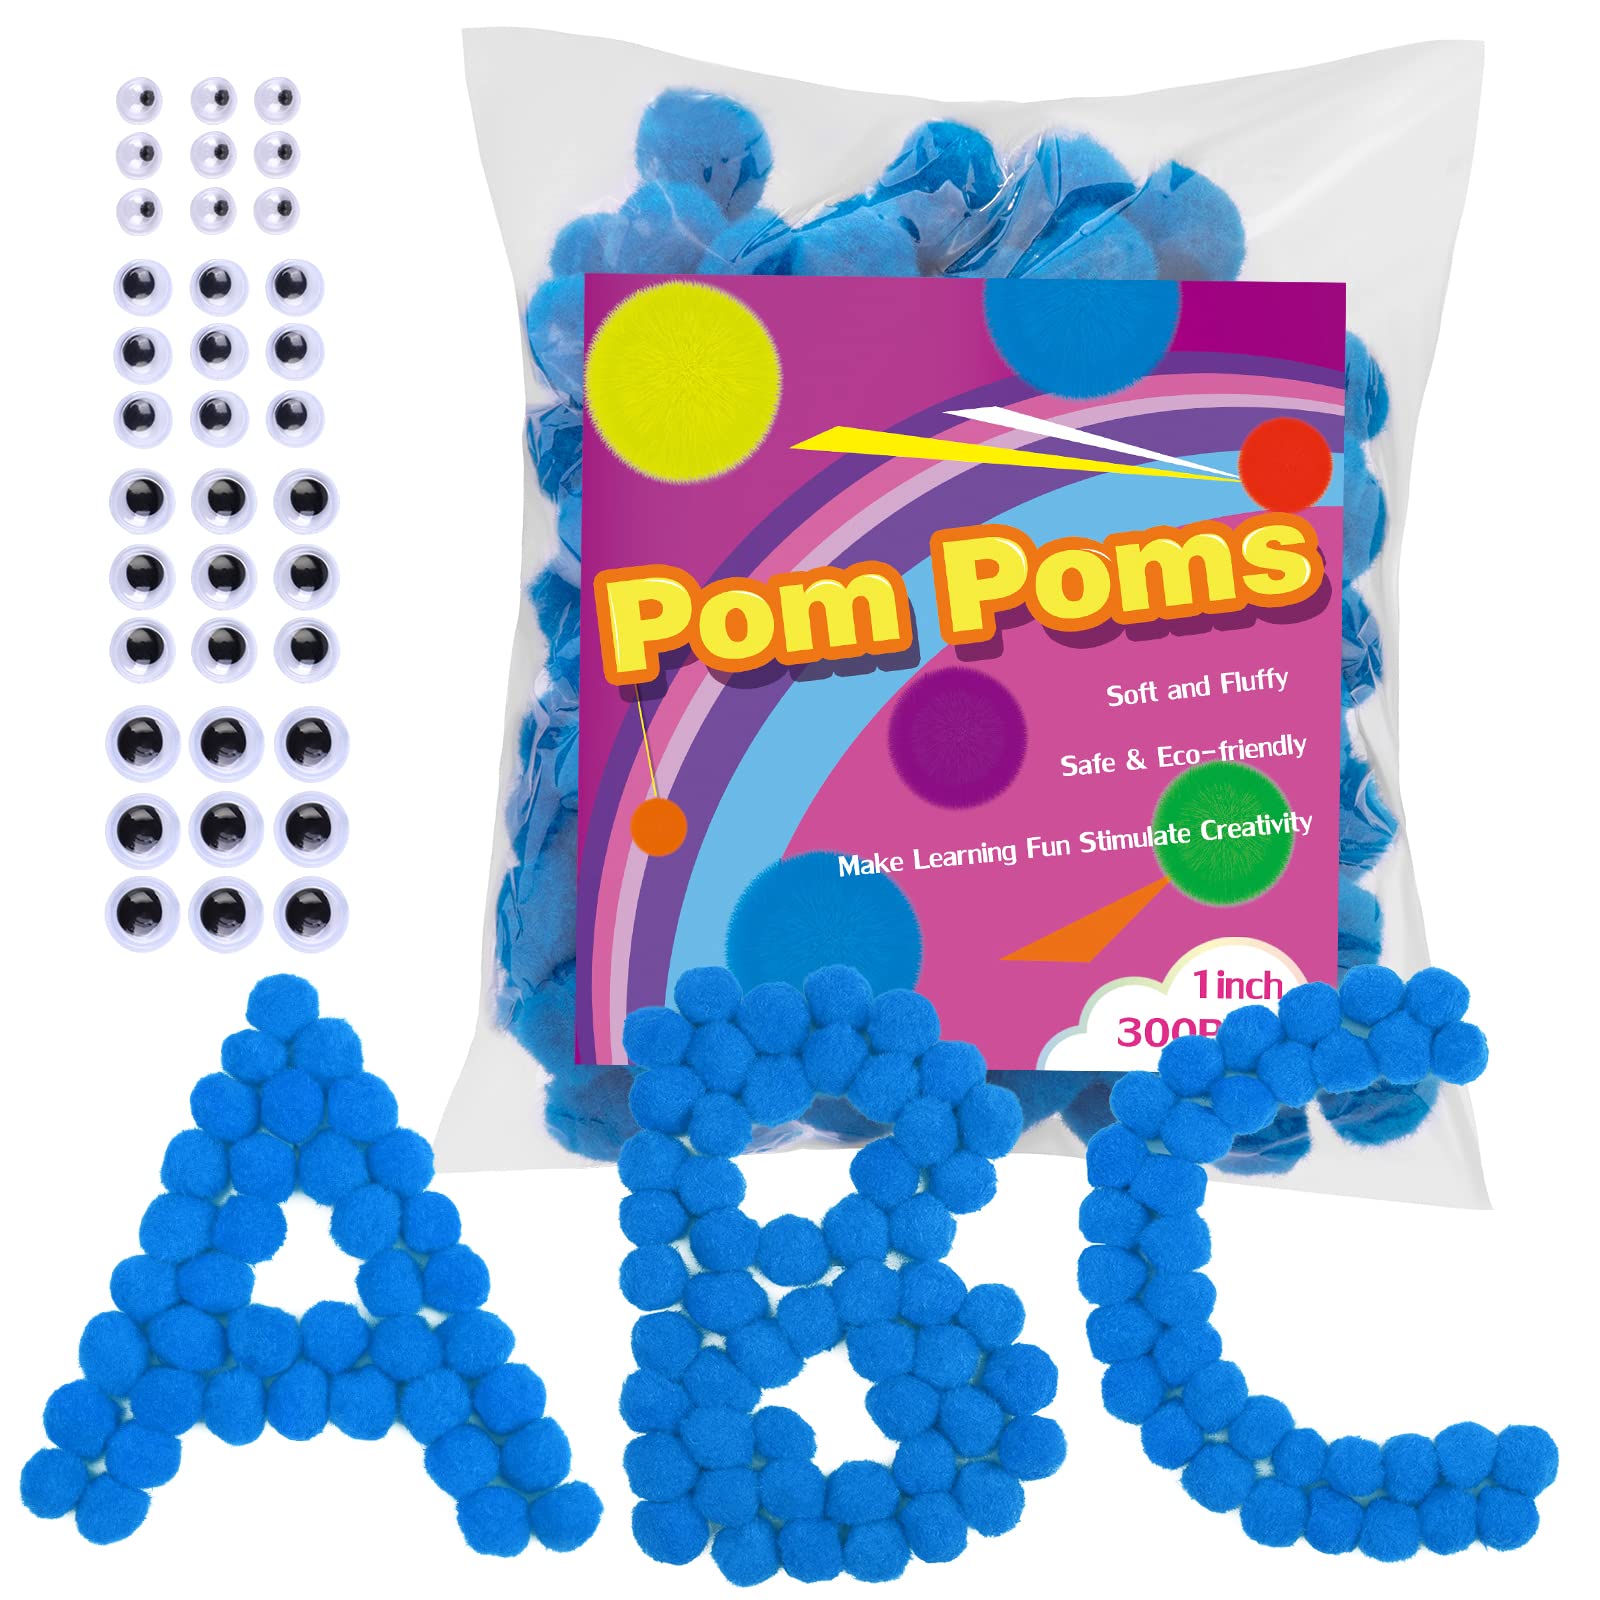  150 Pieces Light Blue Pom Poms, 1 Inch Pom Poms with  Self-Adhesive Wiggly Eyes for Crafts, Small Fuzzy Balls Pompom Puff Balls  for DIY Art Creative Crafts Decorations : Arts, Crafts